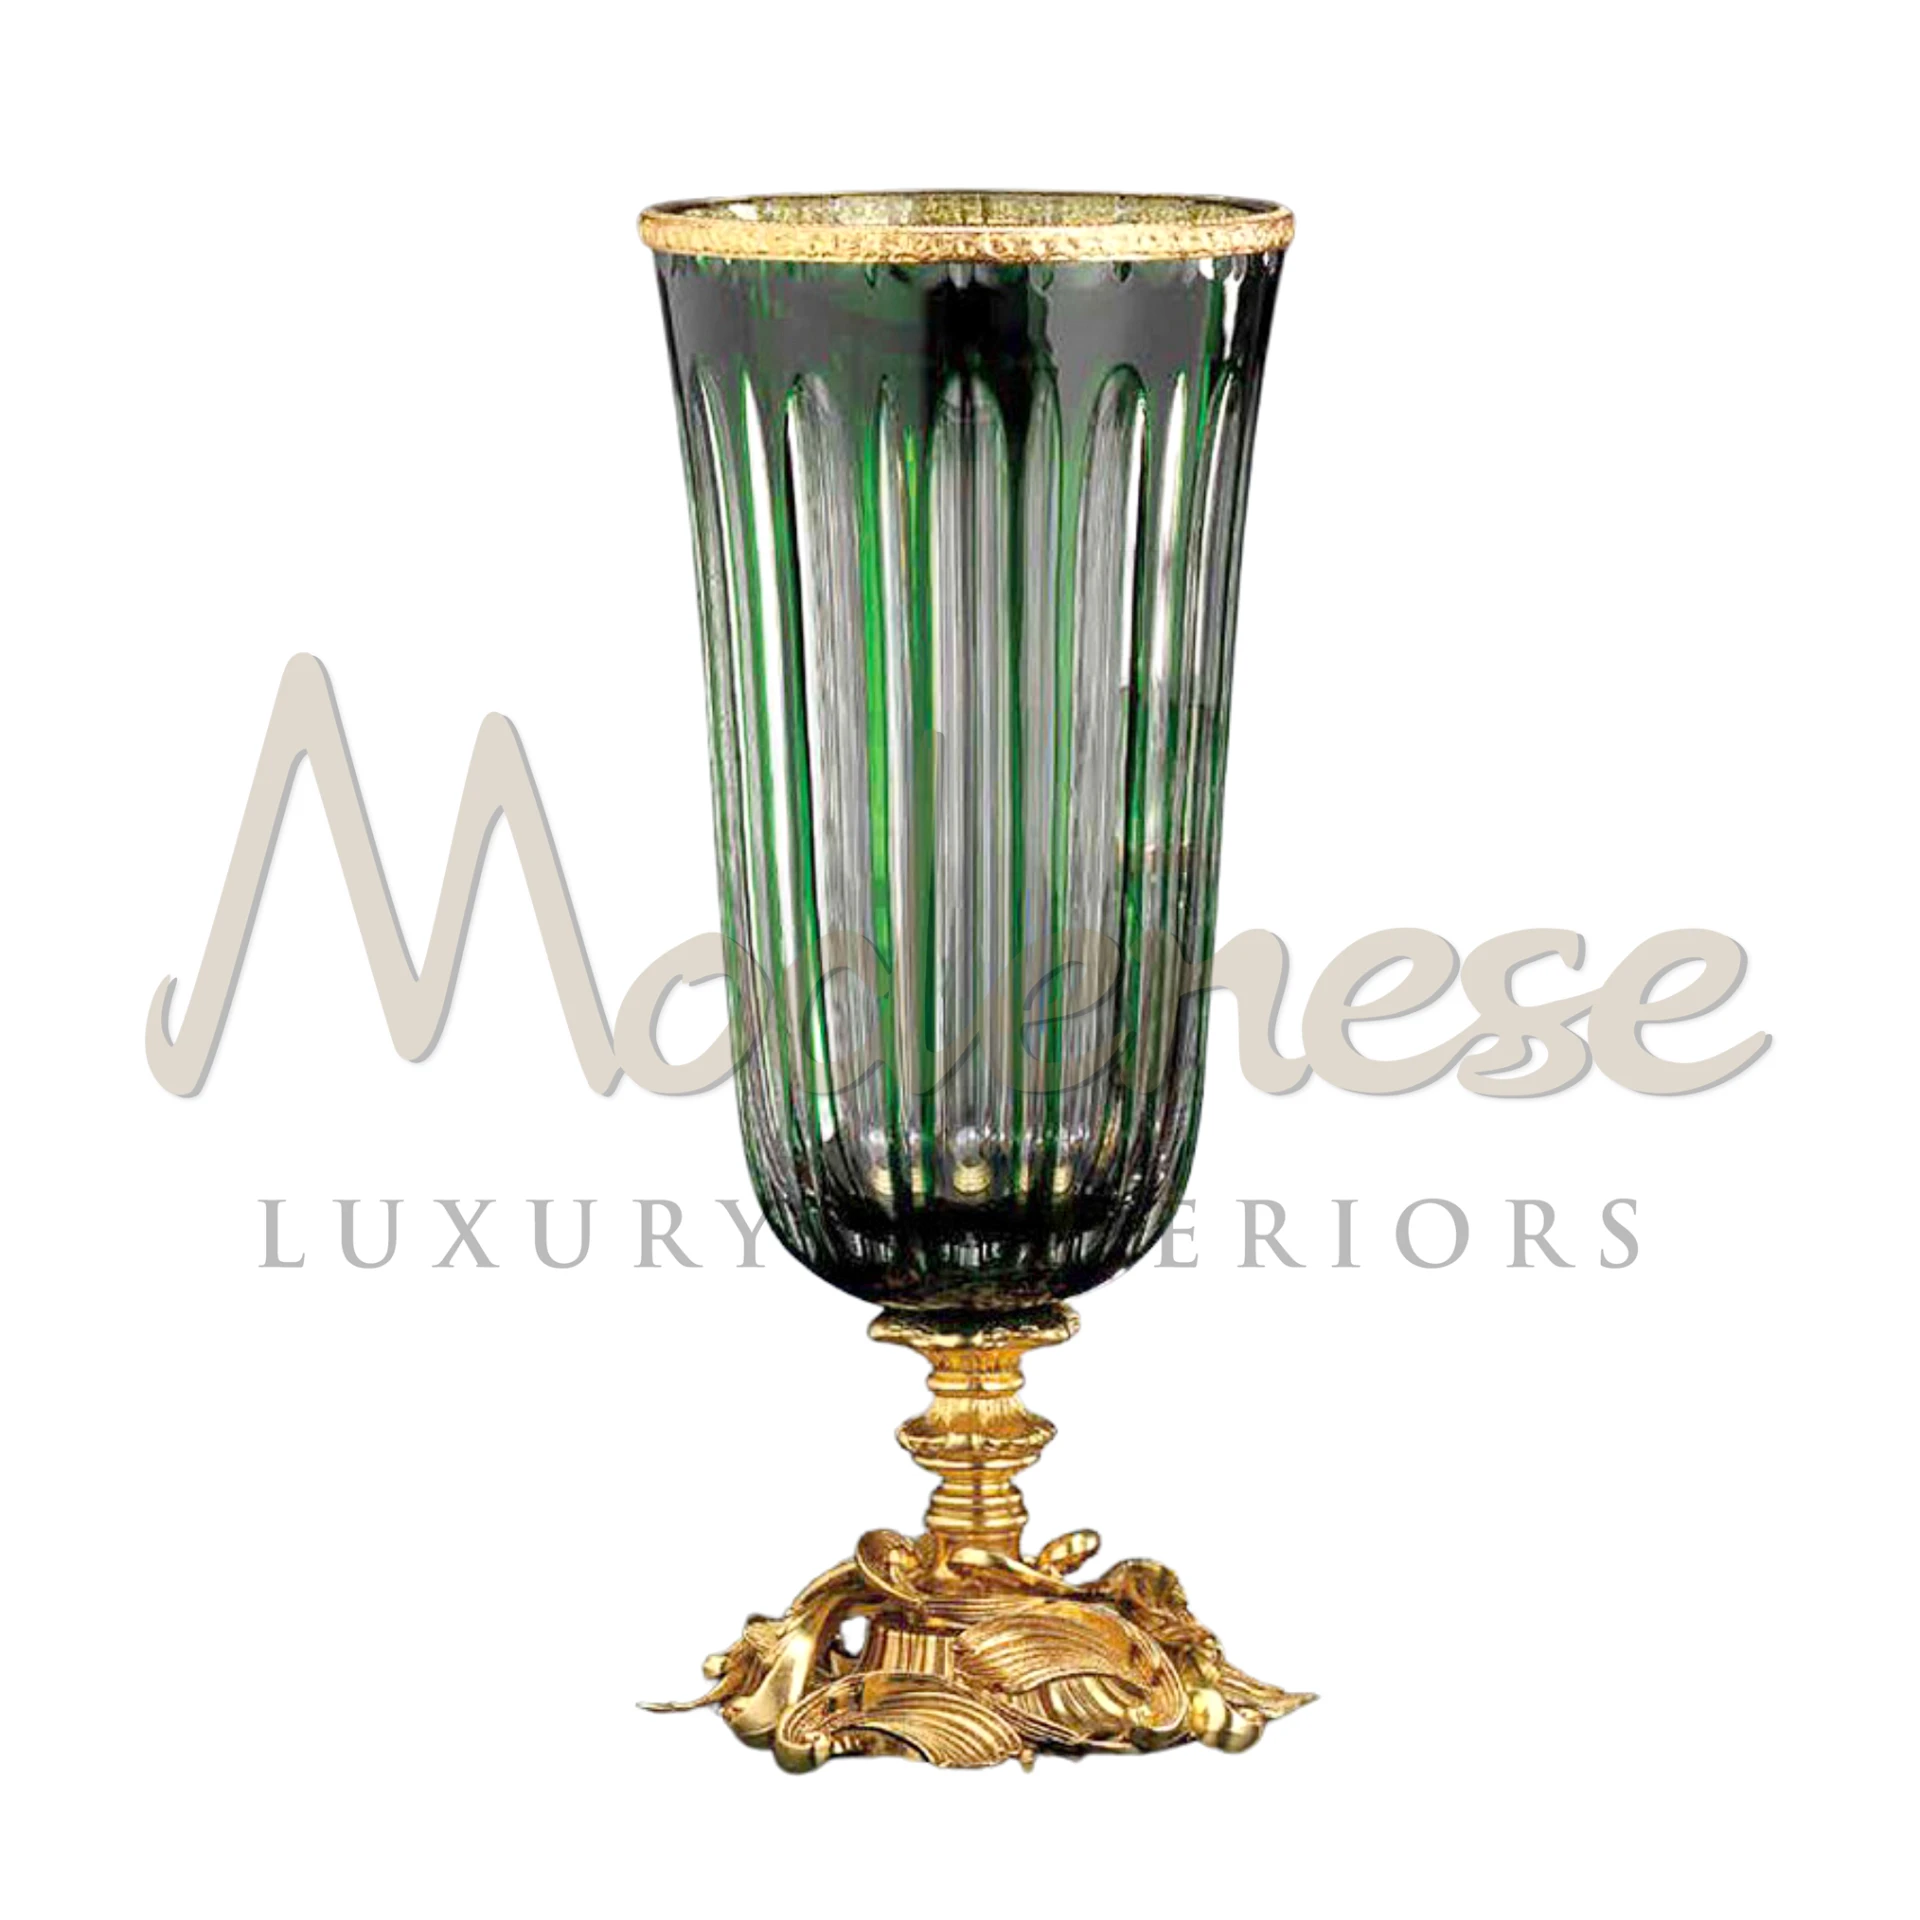 Traditional Tall Green Glass Bowl, exquisitely crafted for luxury decor, combines elegance with traditional style, ideal for displaying long-stemmed flowers or adding color.